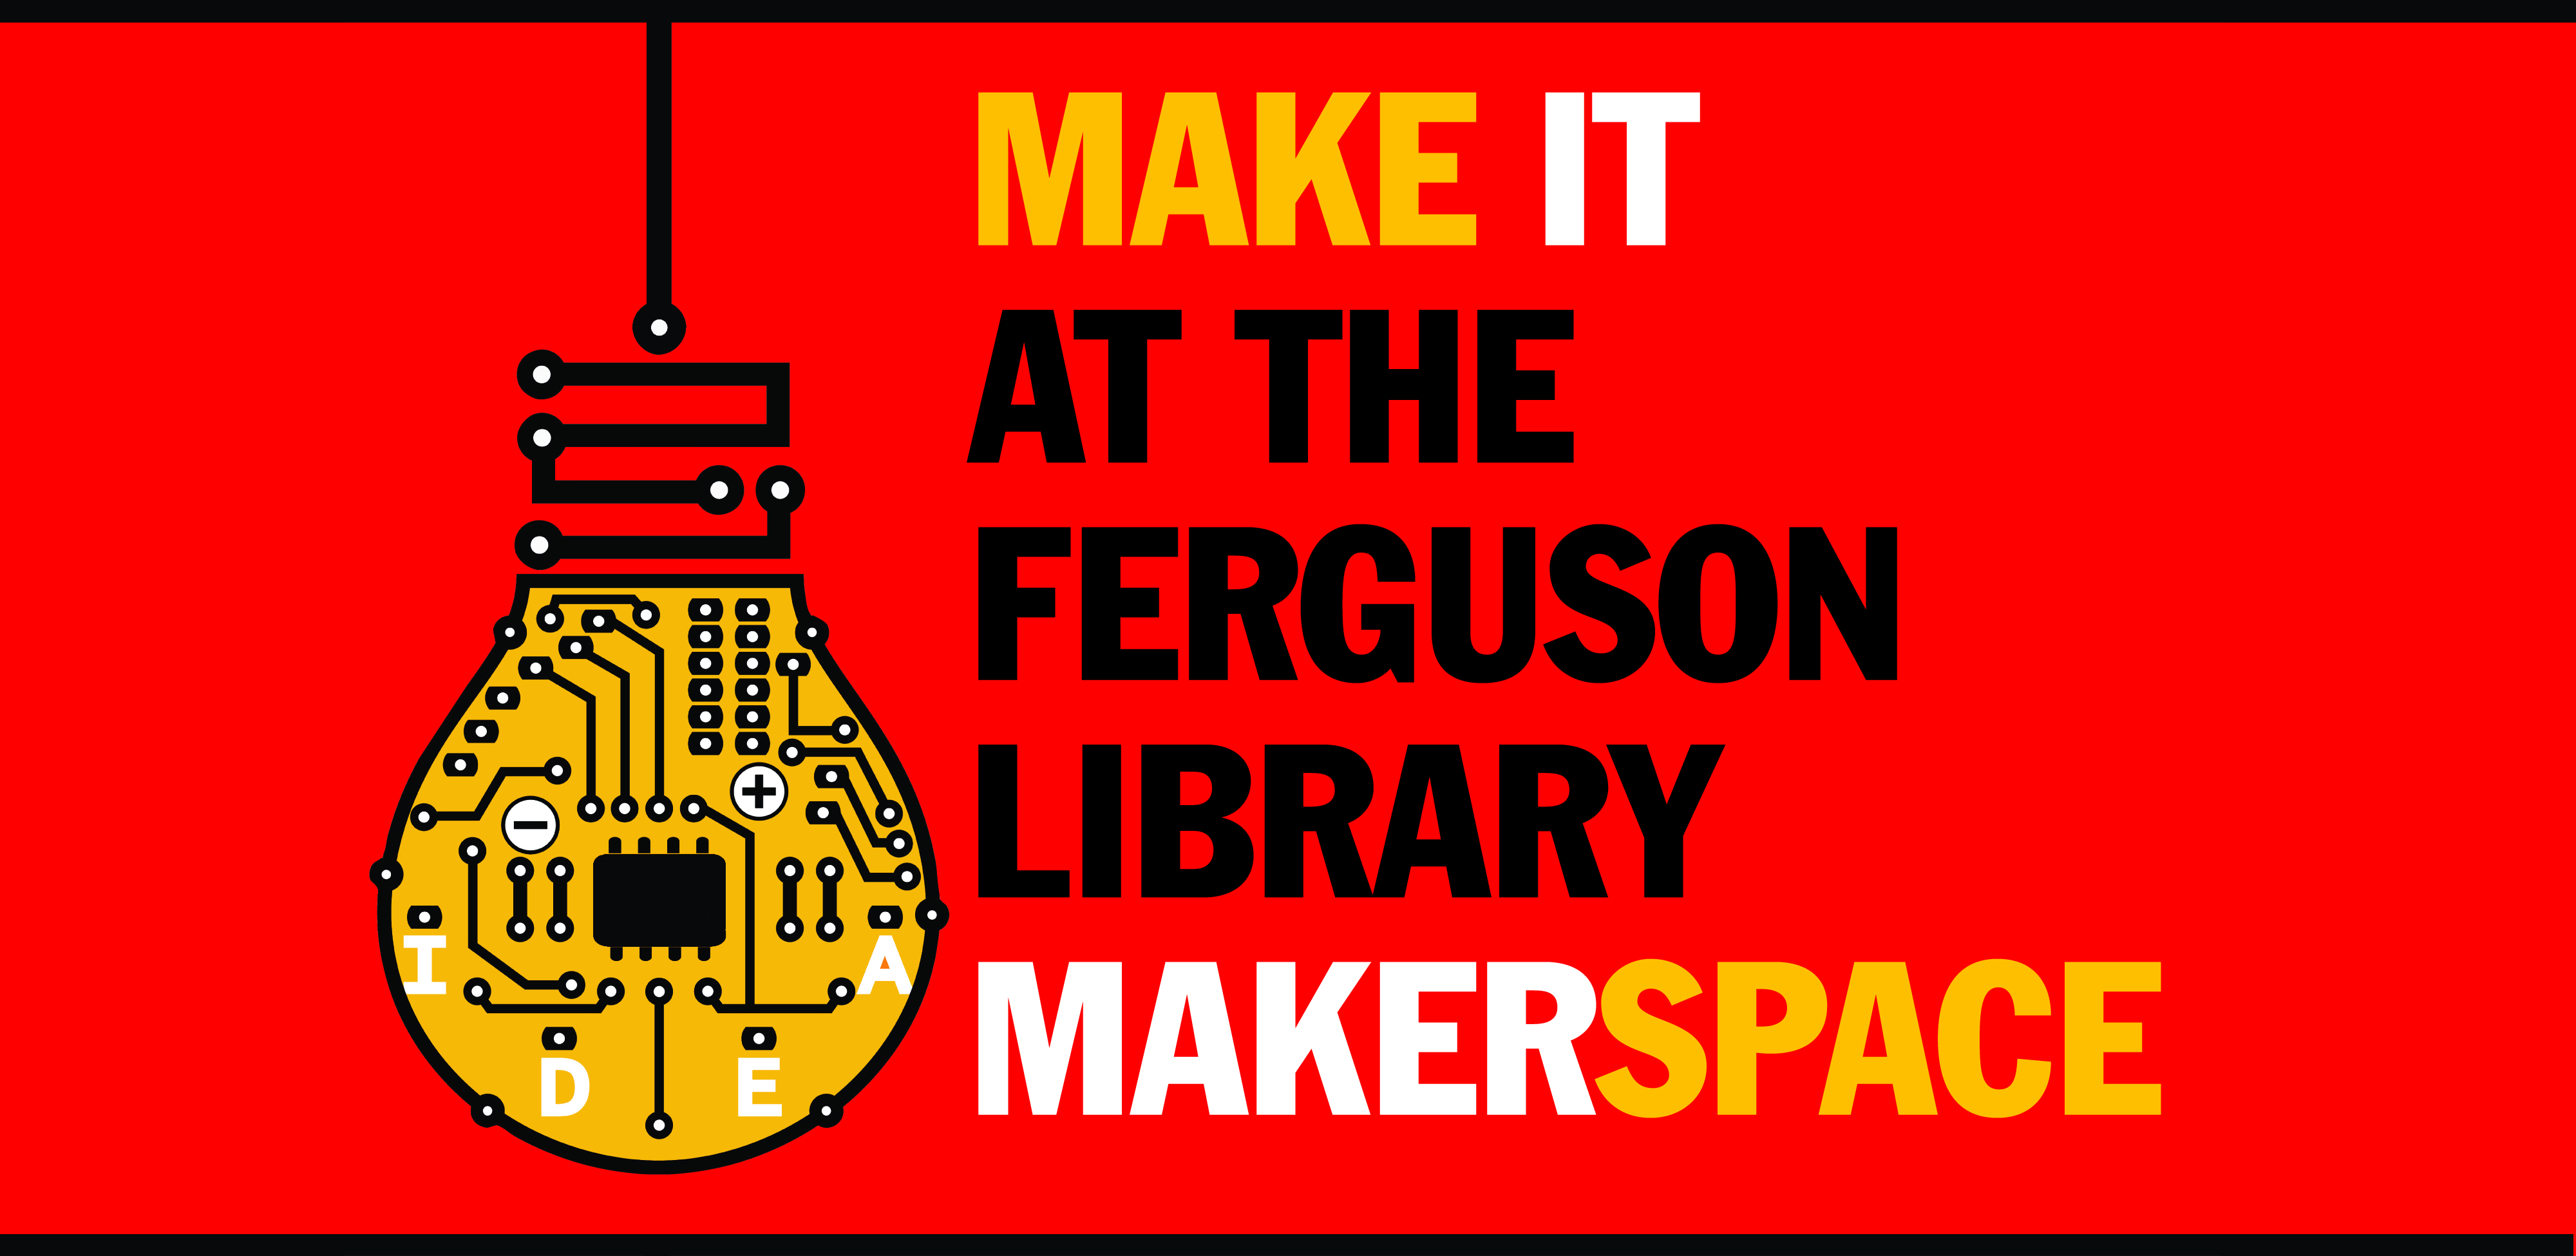 Make it at the Ferguson Library Makerspace